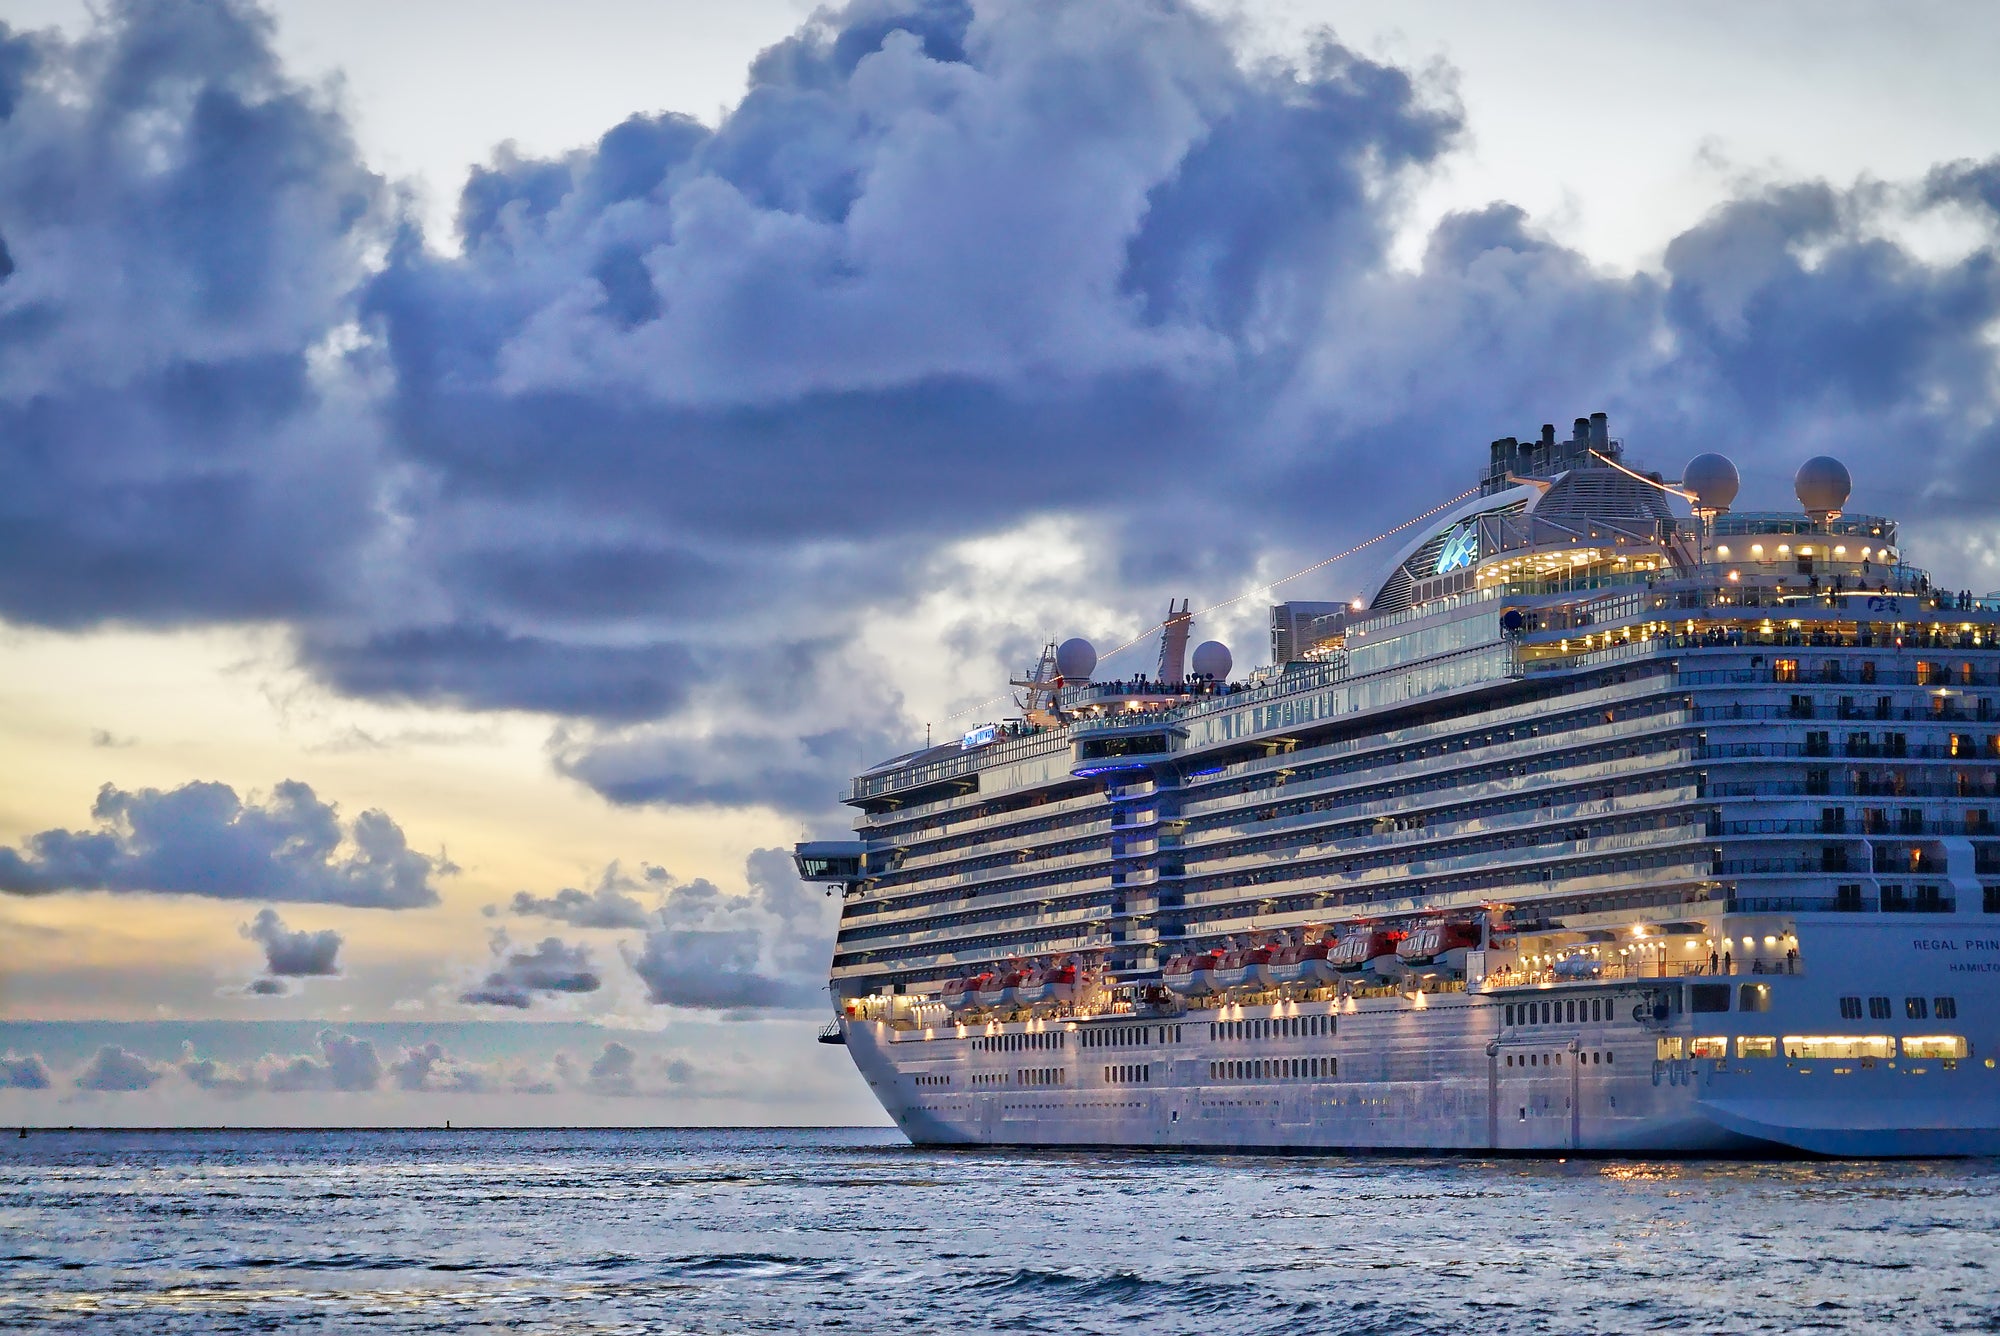 15 THINGS EVERYONE SHOULD KNOW BEFORE GOING ON A CRUISE